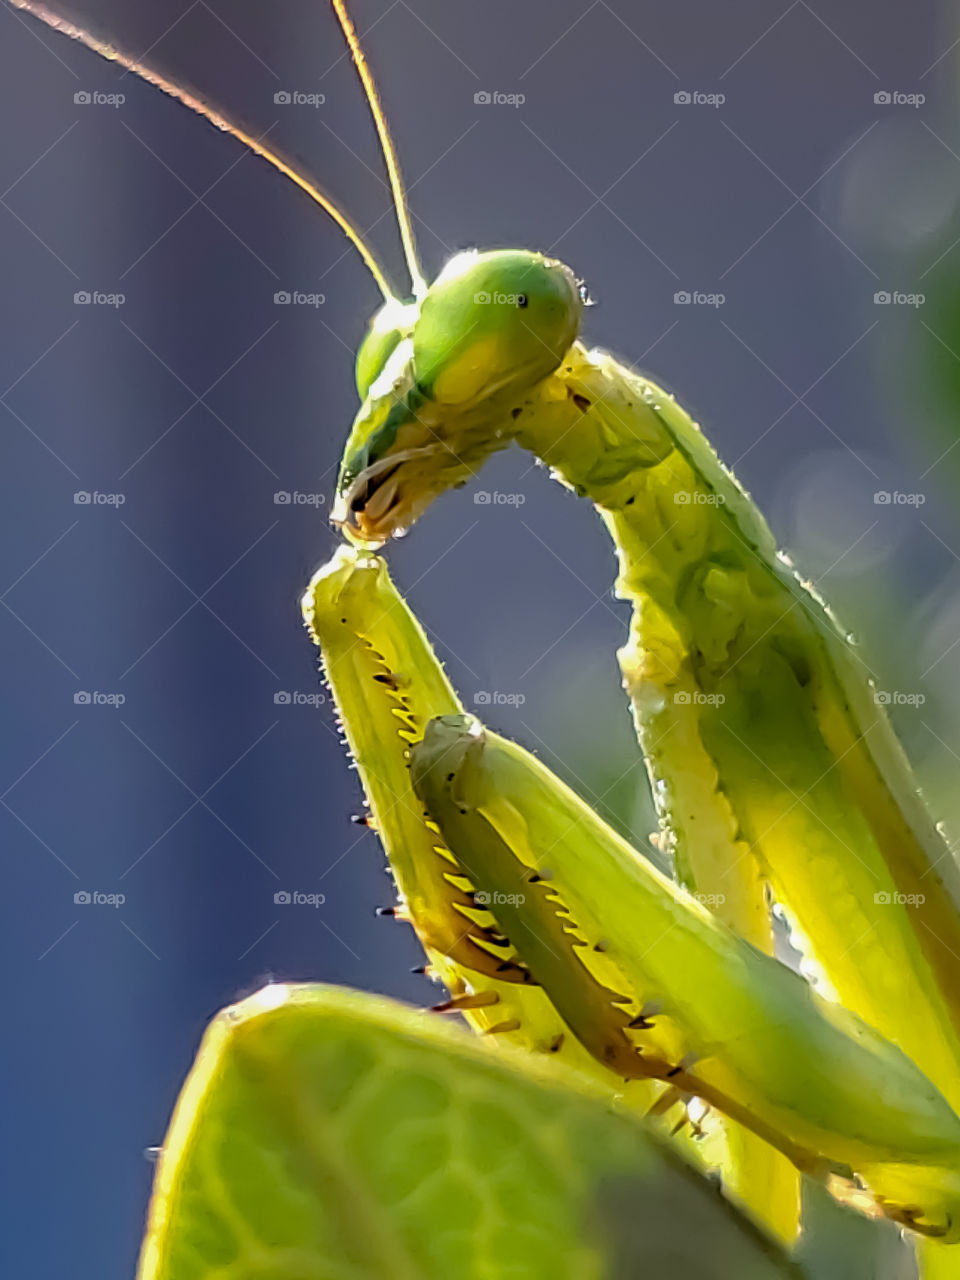 Macro of a female praying mantis looking at the camera while being illuminated by morning sunlight.